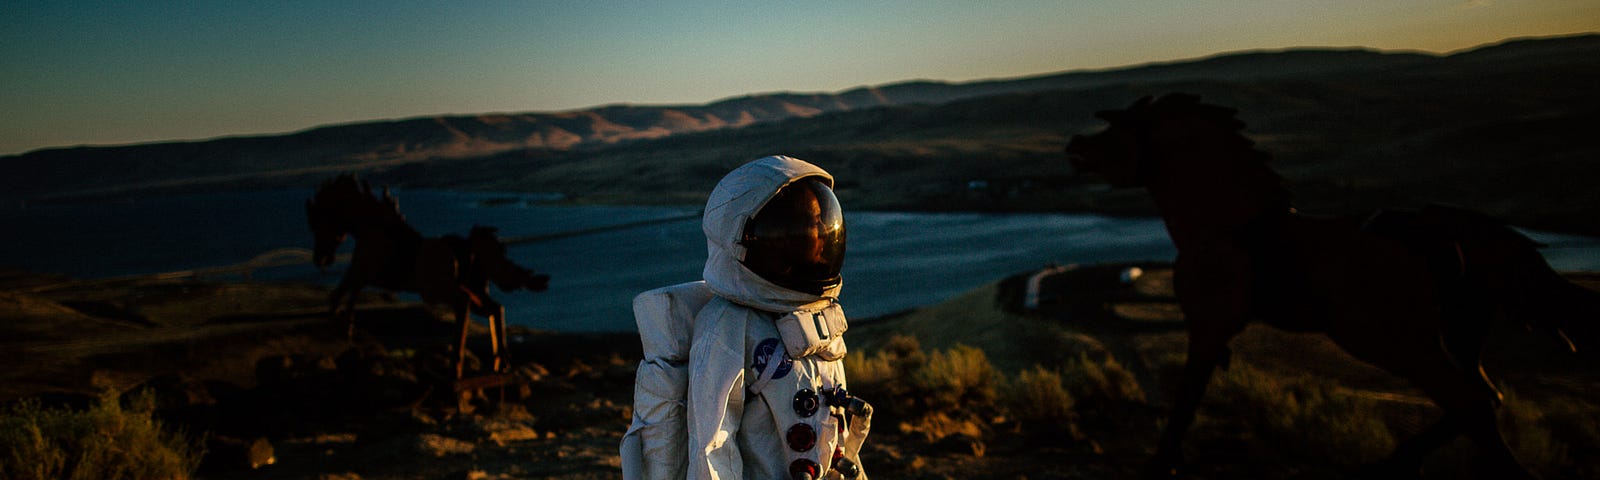 photo credit: Donald Derosier — Space Hero Mission — a photo project about what it means to be an astronaut.